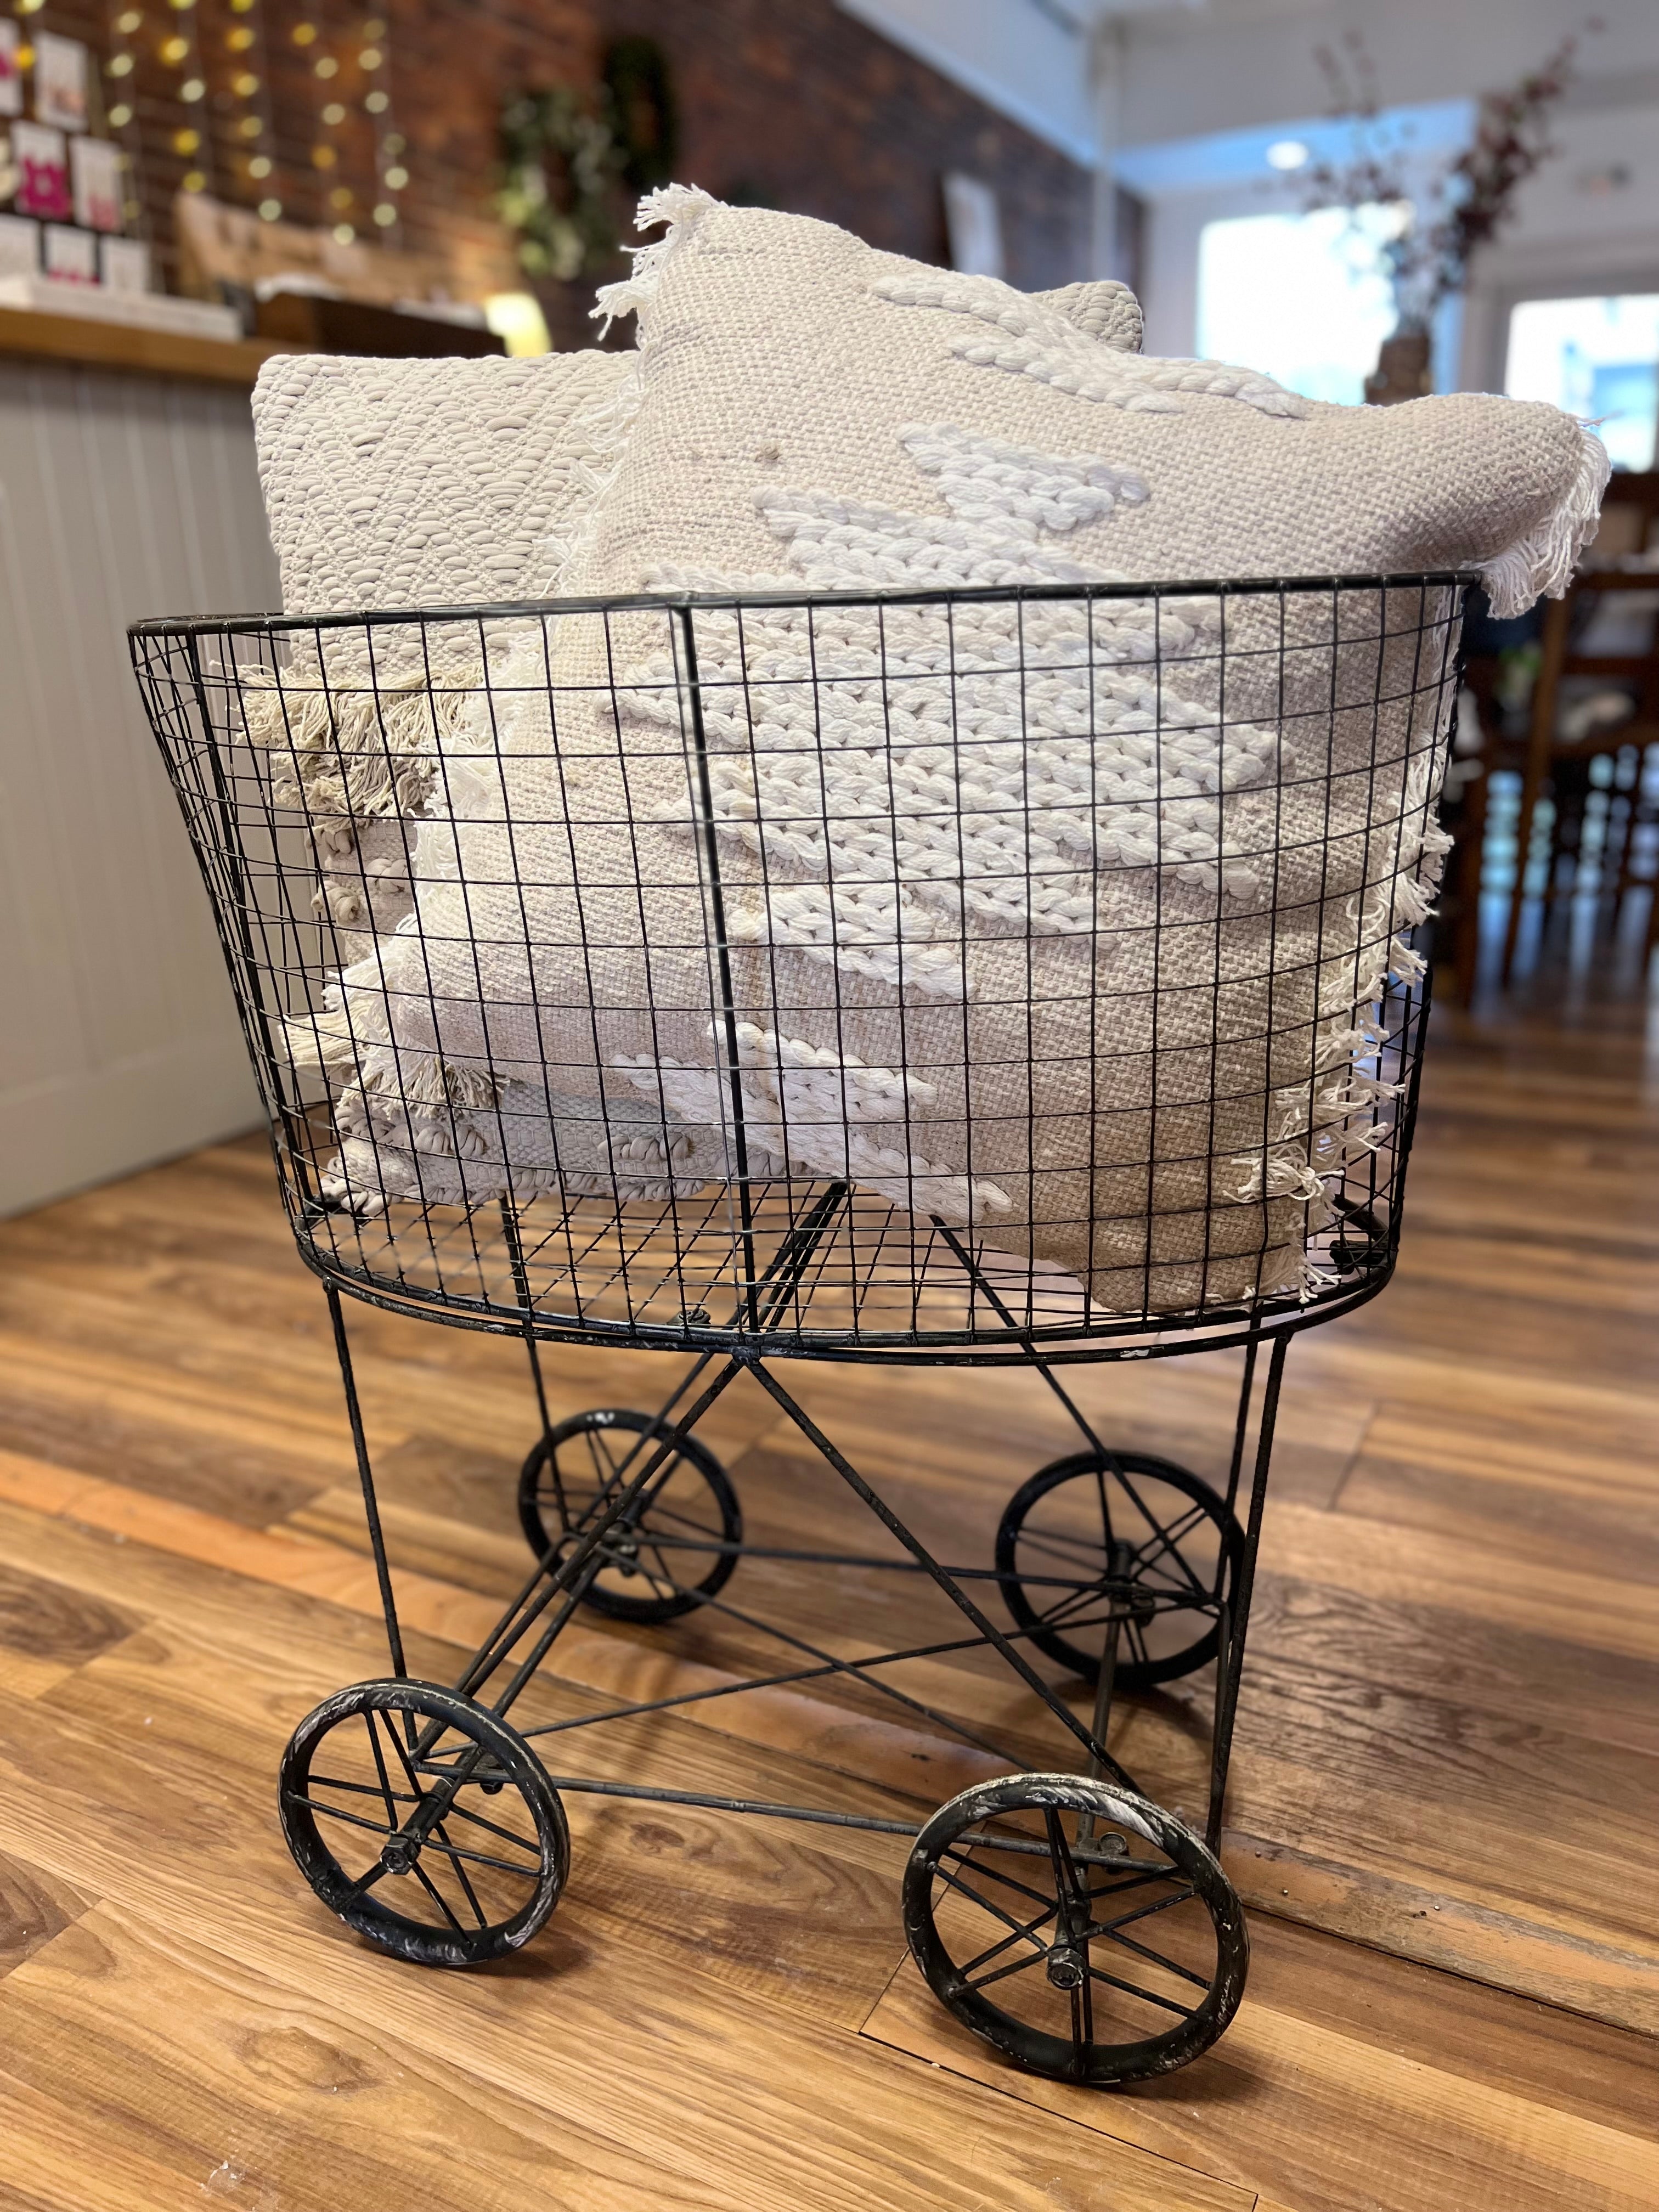 Metal Reproduction of Vintage Laundry Basket On Wheels